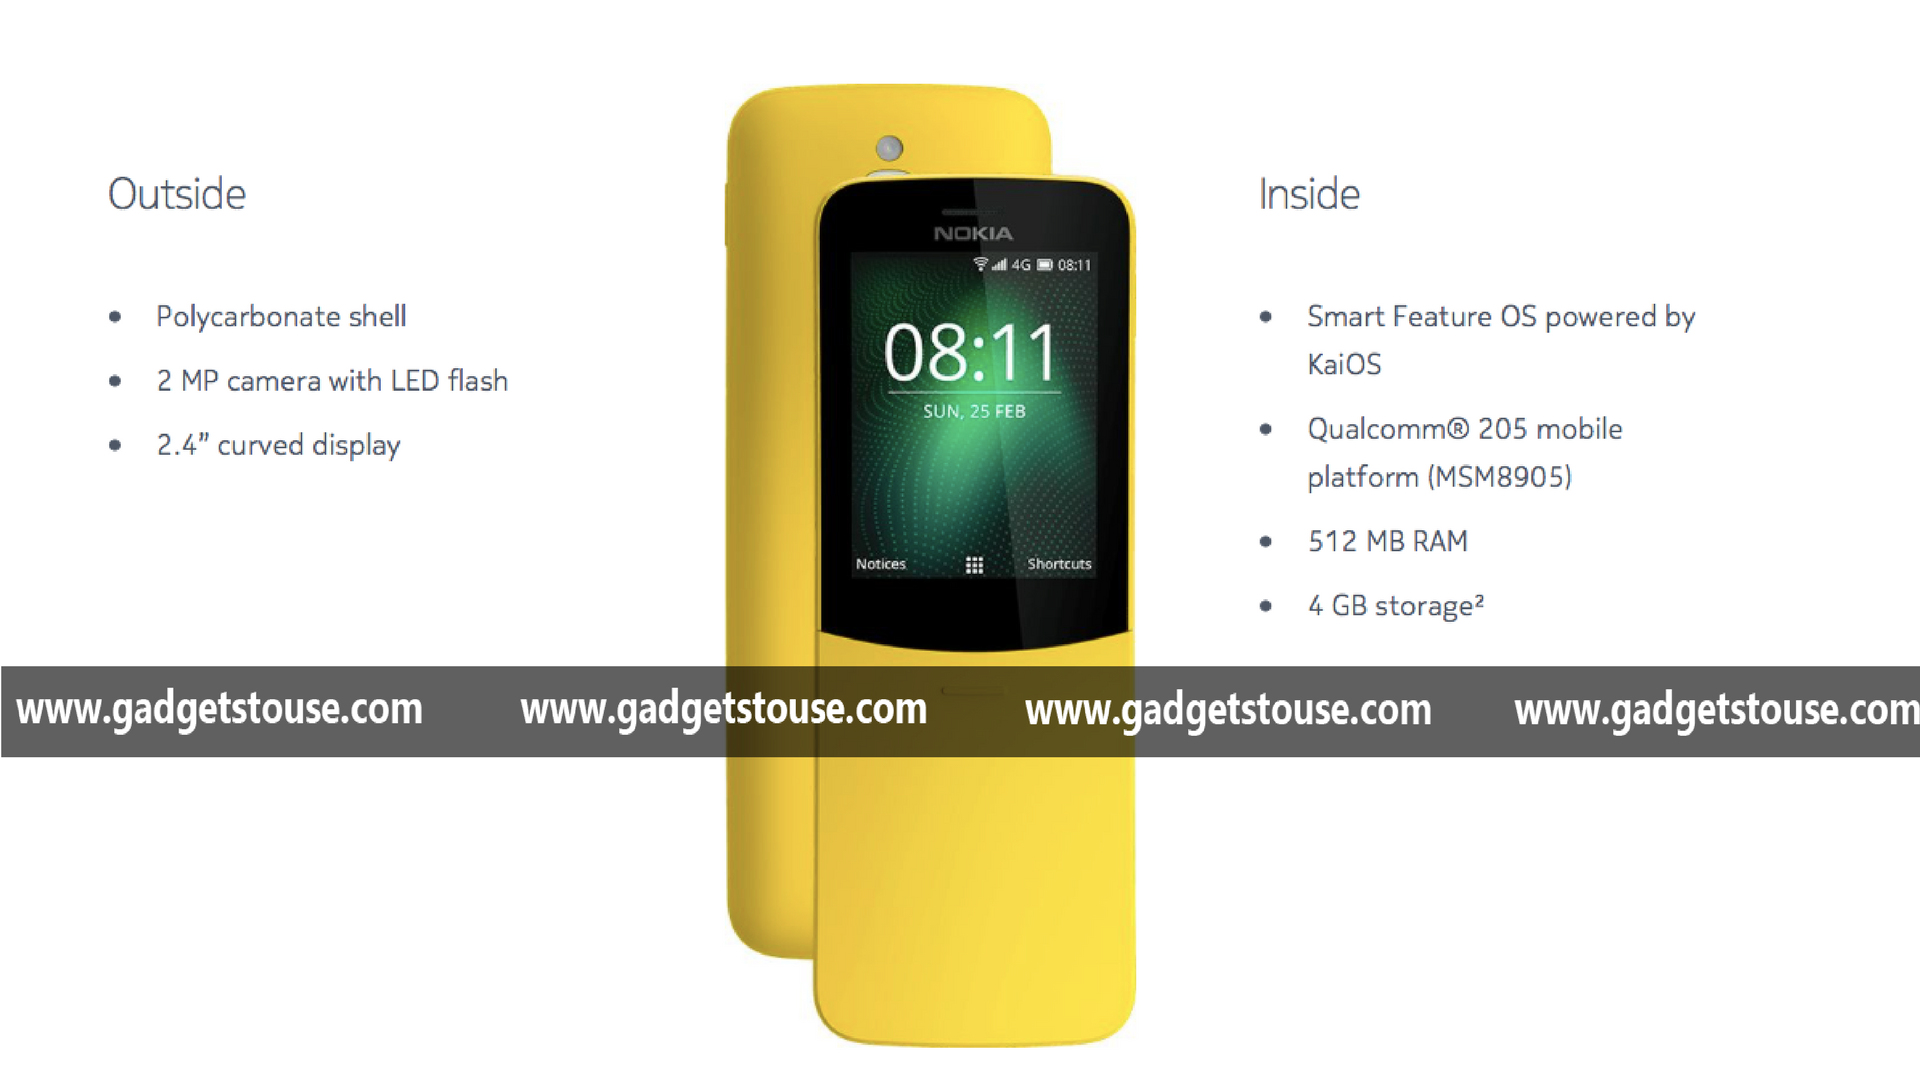 Nokia 8110 4G - Full phone specifications